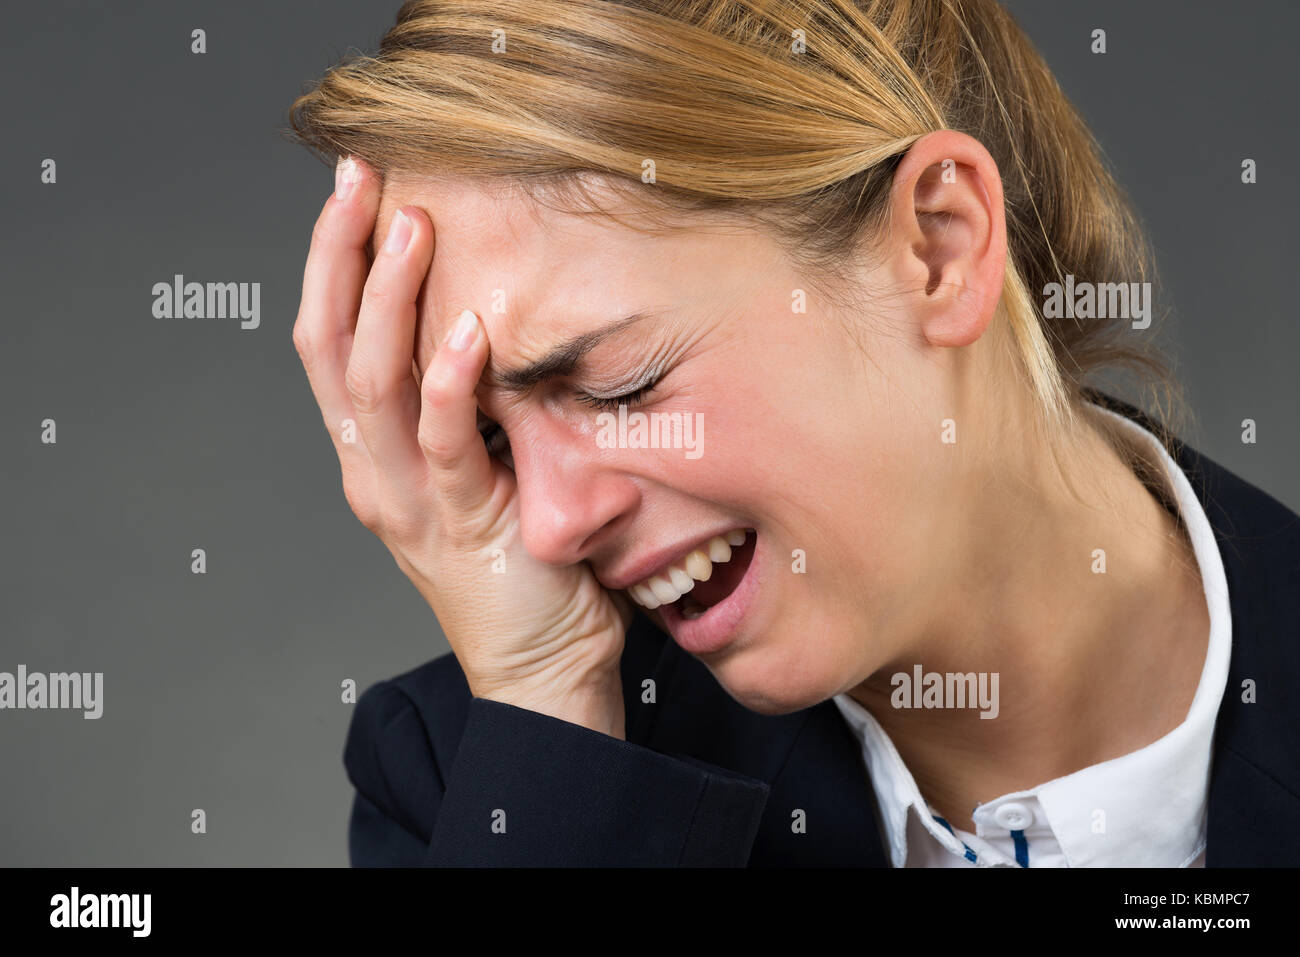 Closeup of young businesswoman crying over gray background Stock Photo